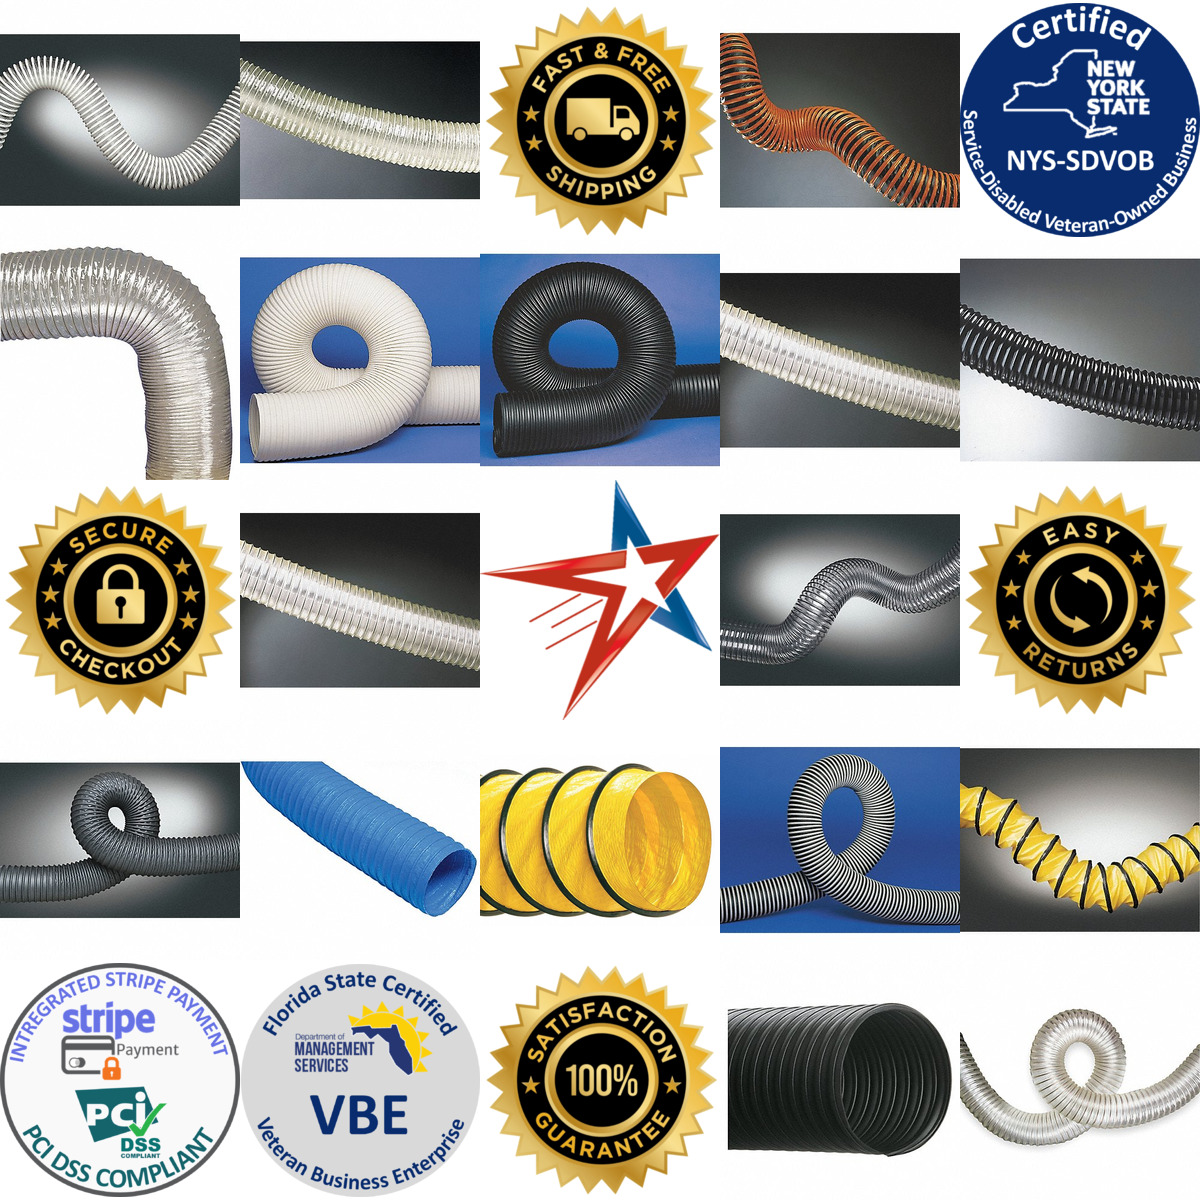 A selection of Duct Hoses products on GoVets